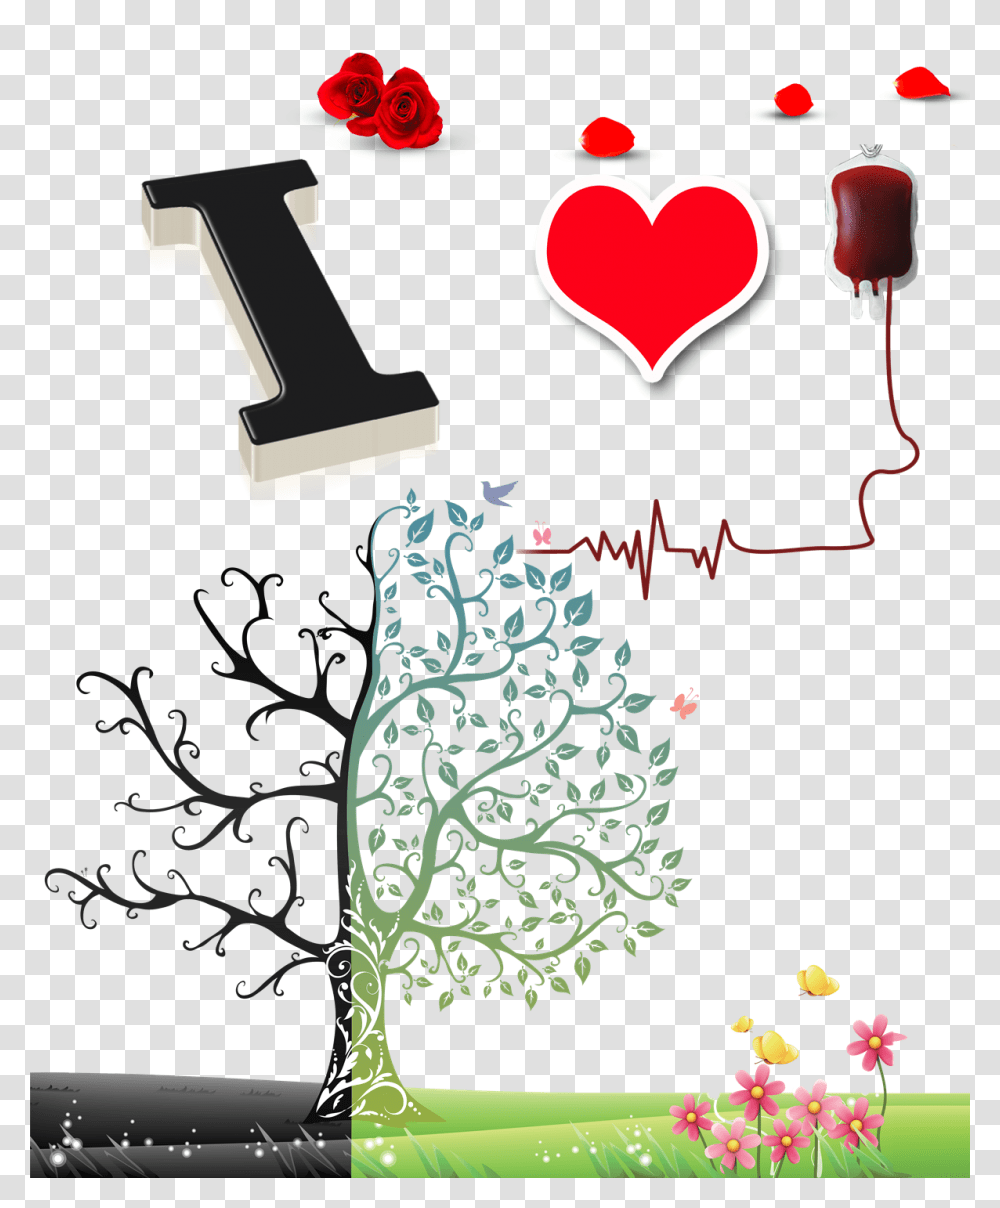 Blood Donation Image Family Tree Svg Free, Heart, Graphics, Text, Key Transparent Png